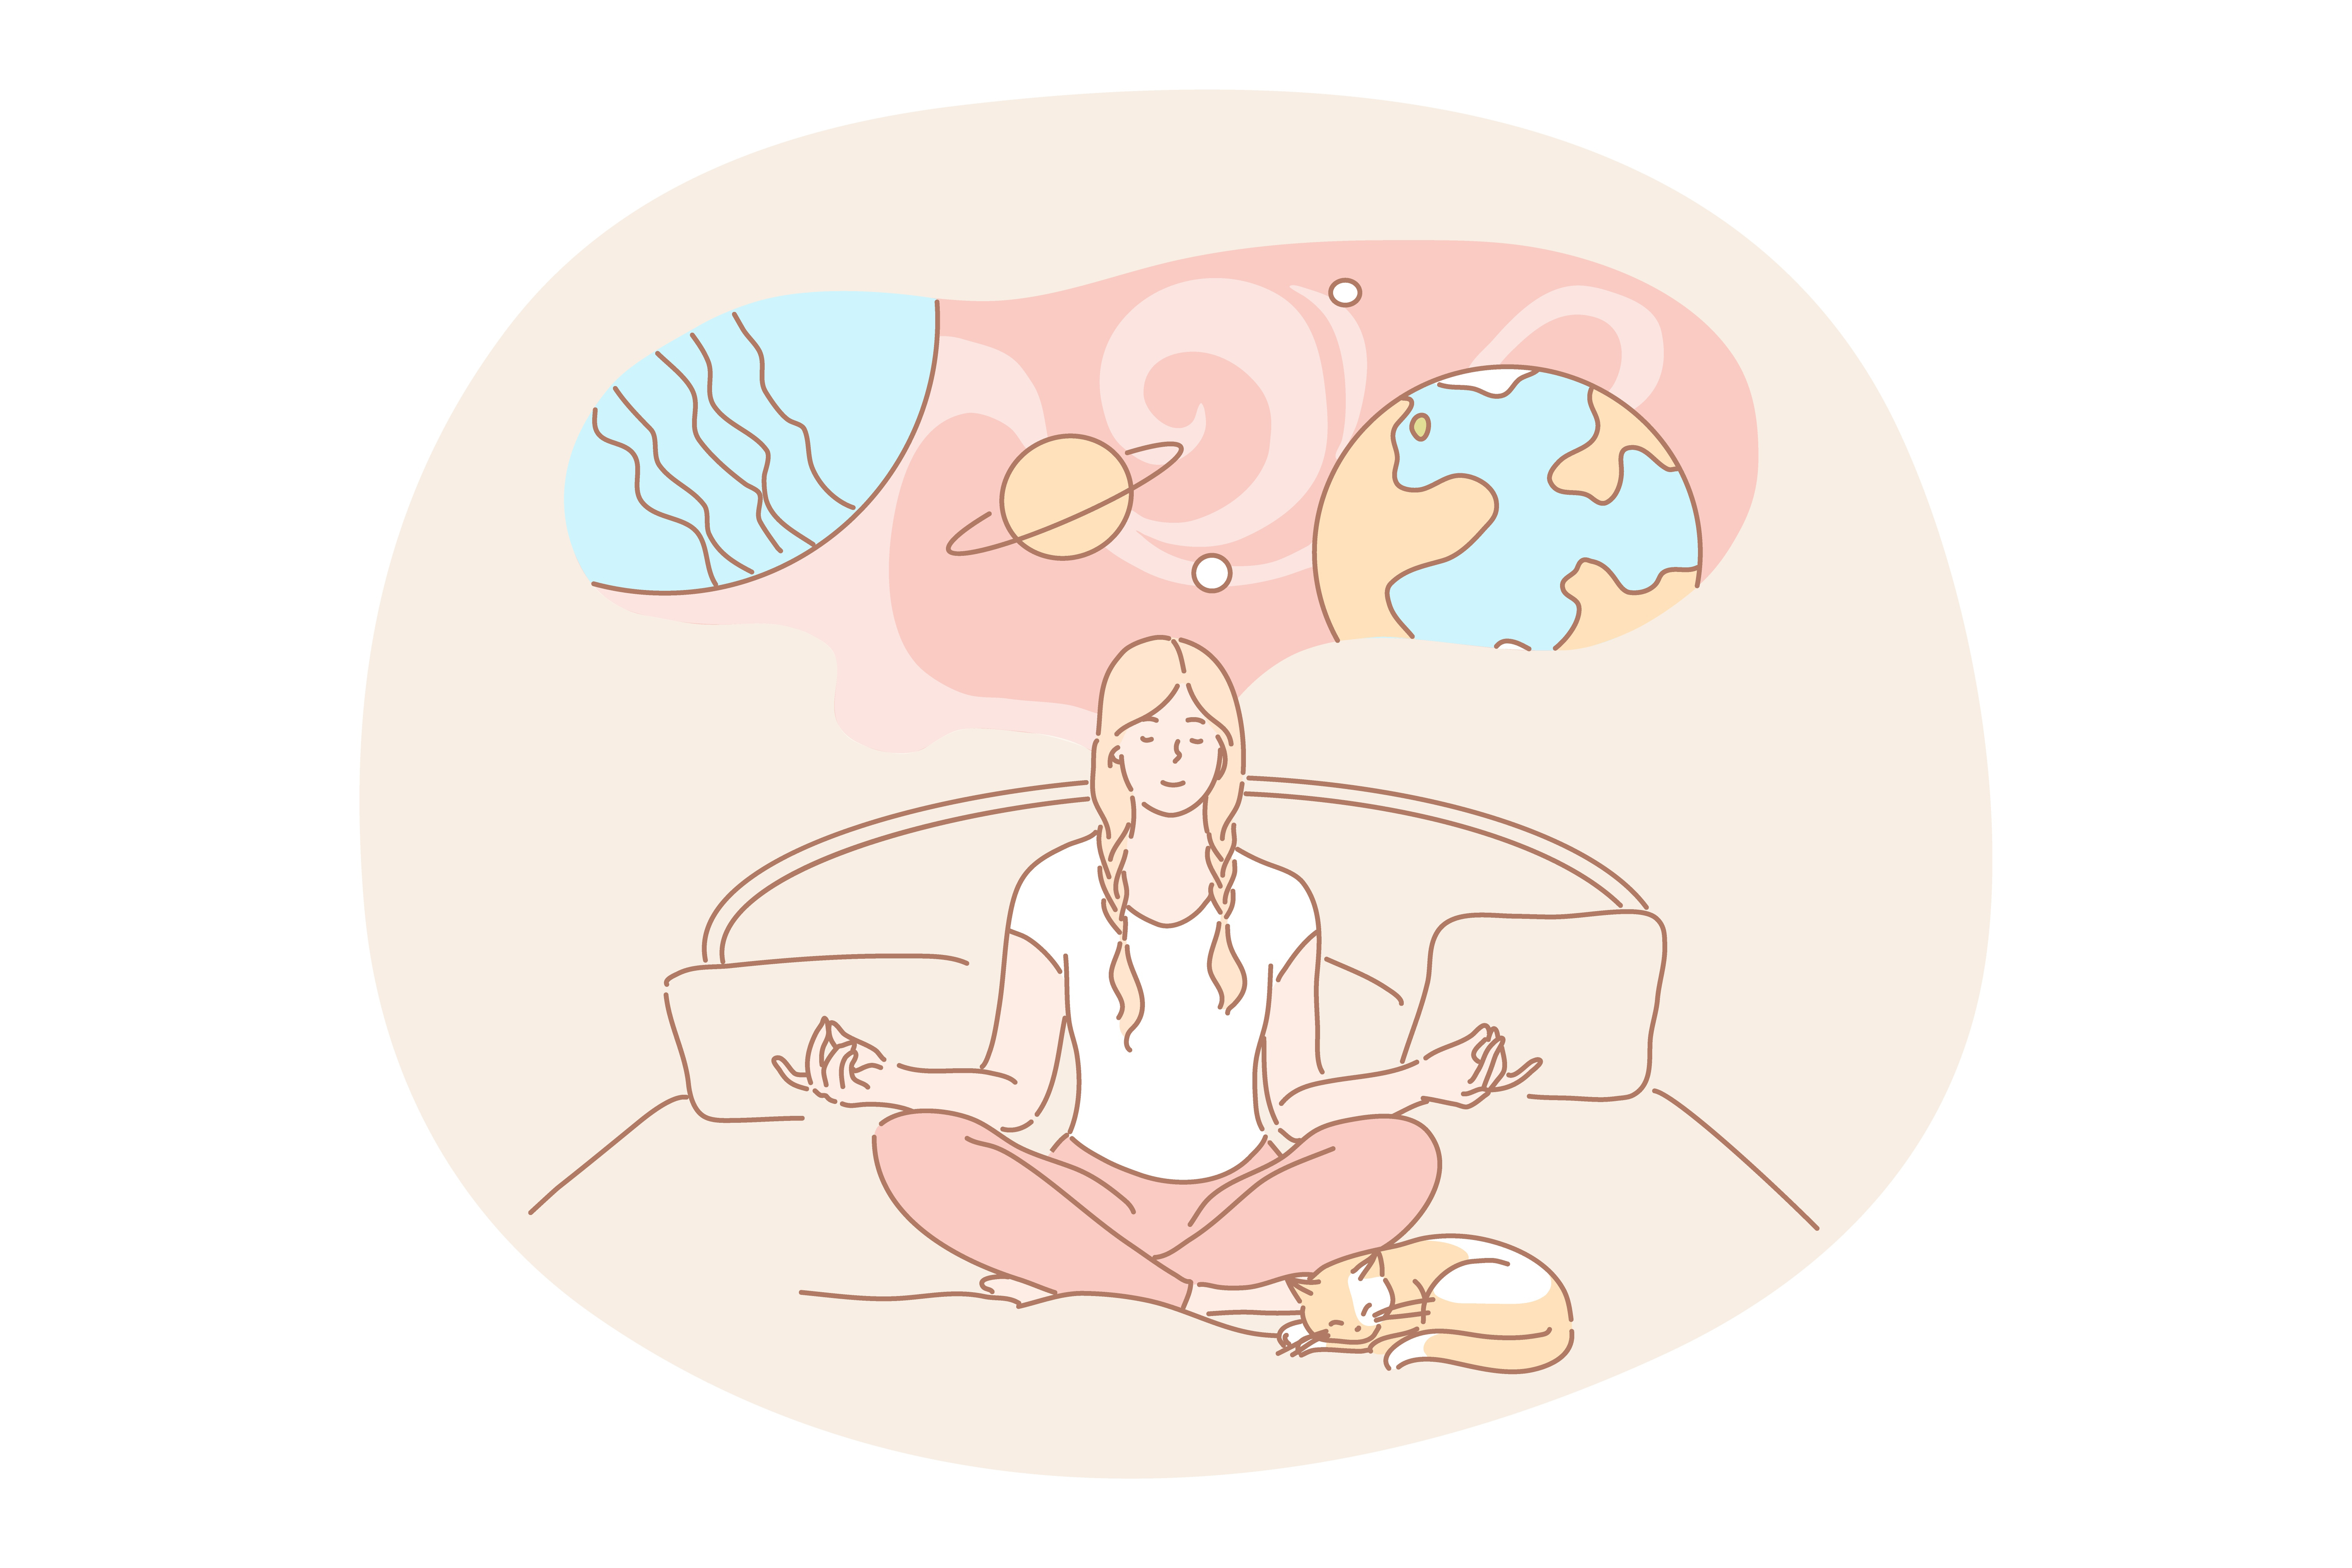 Yoga, meditation, imagination concept. Calm woman cartoon character meditating dreaming doing yoga exercises in lotus pose. Imagination or dream expansion of consciousness and imaginative mindset.. Yoga, meditation, imagination concept